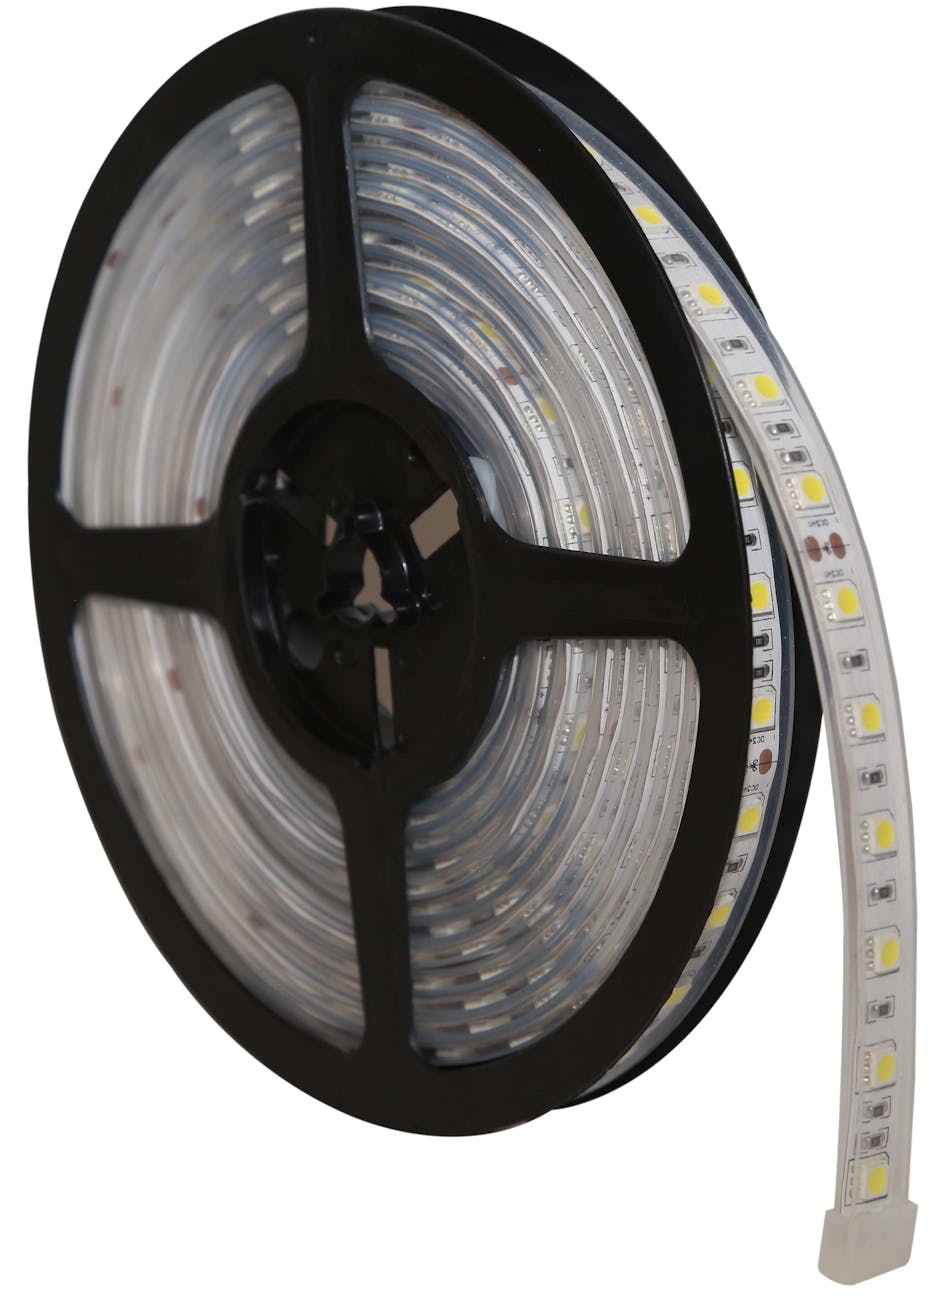 Code 3 launches 100 Series Self-Adhesive Strip Light.